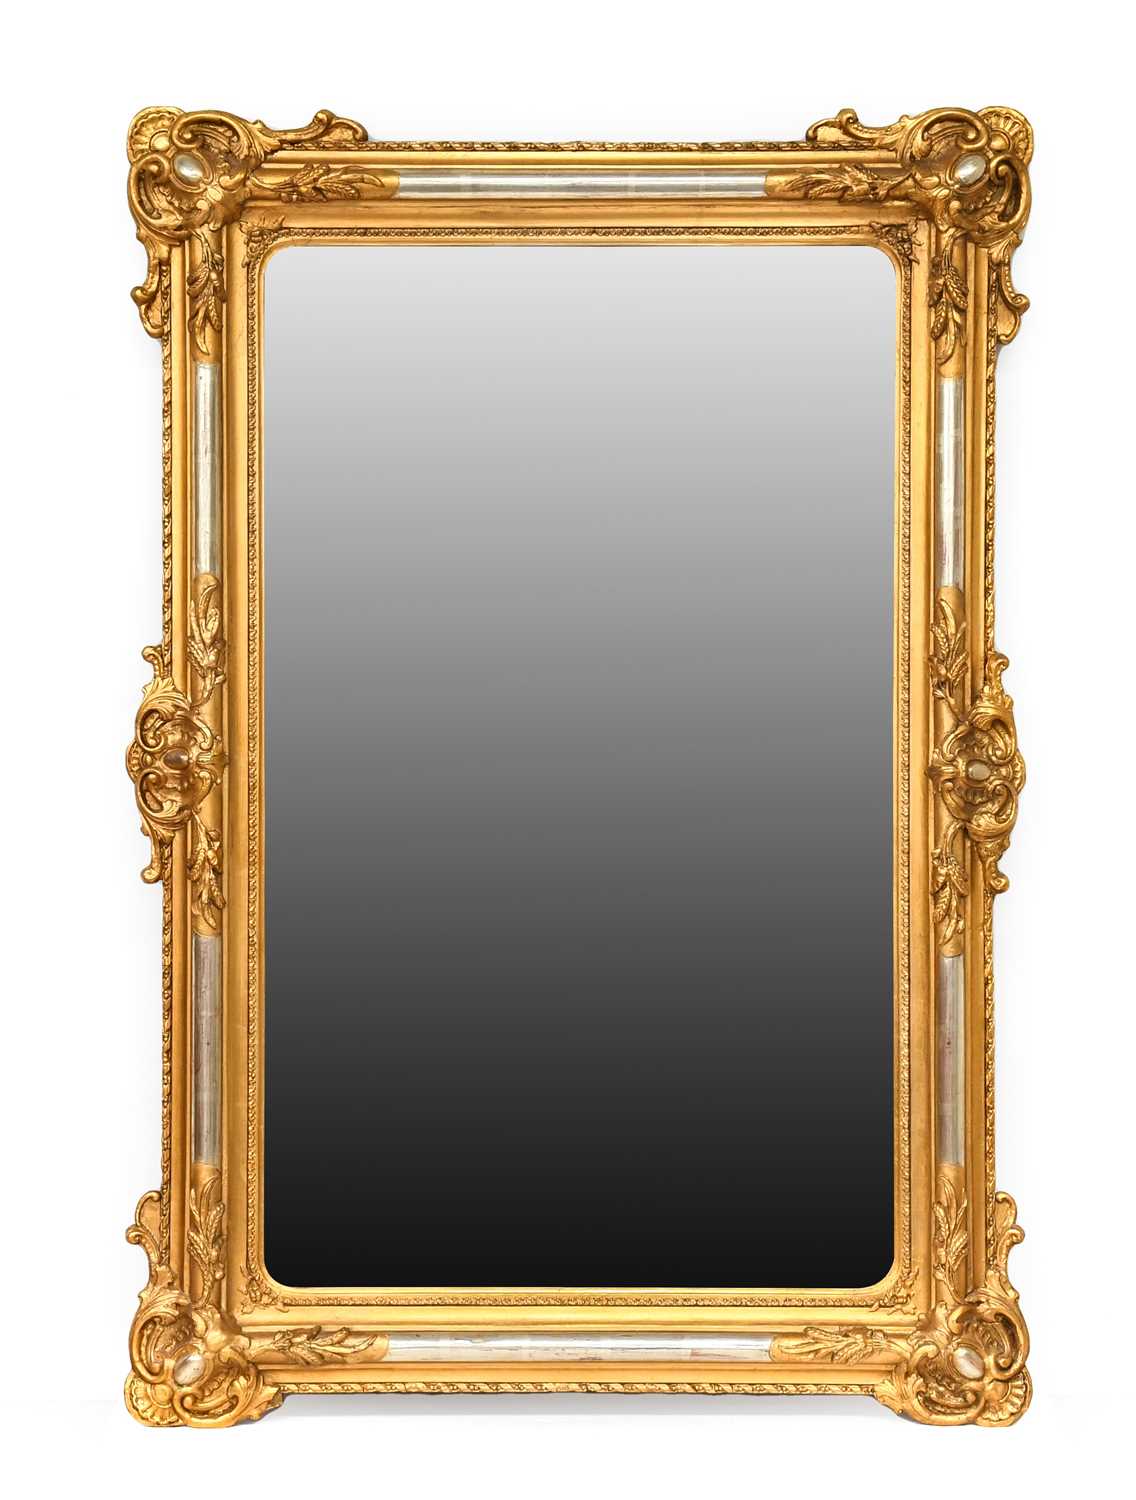 A Late 19th Century Gilt and Gesso Wall Mirror, the plain mirror plate surmounted with C scrolls and